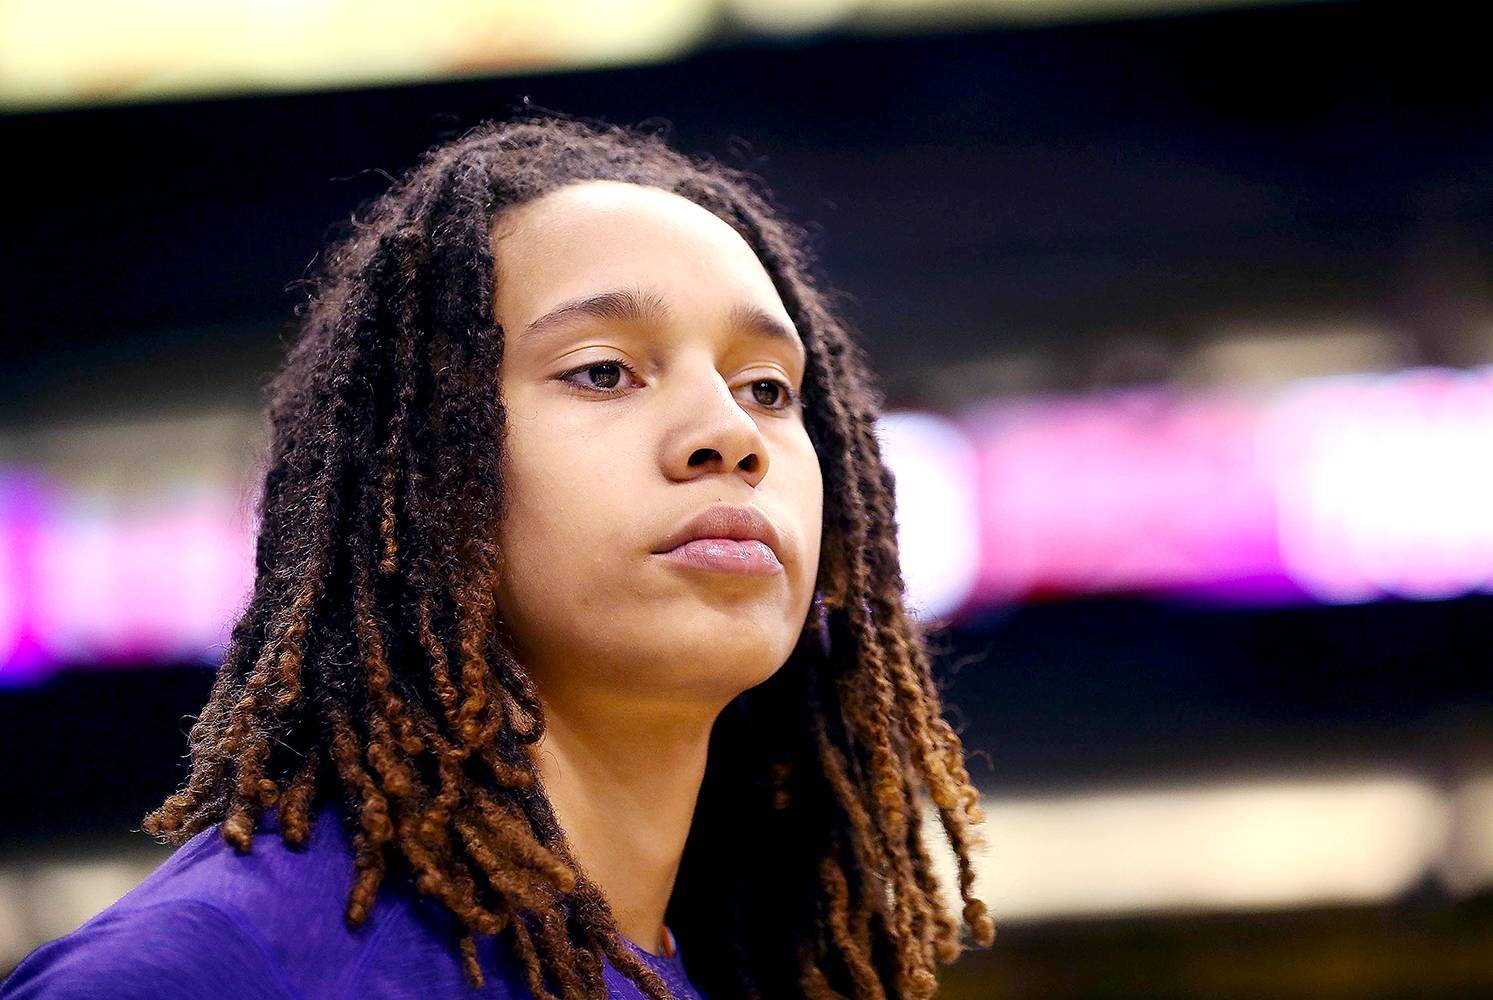 WNBA Players Call for Charter Flights (Again) After Griner Incident